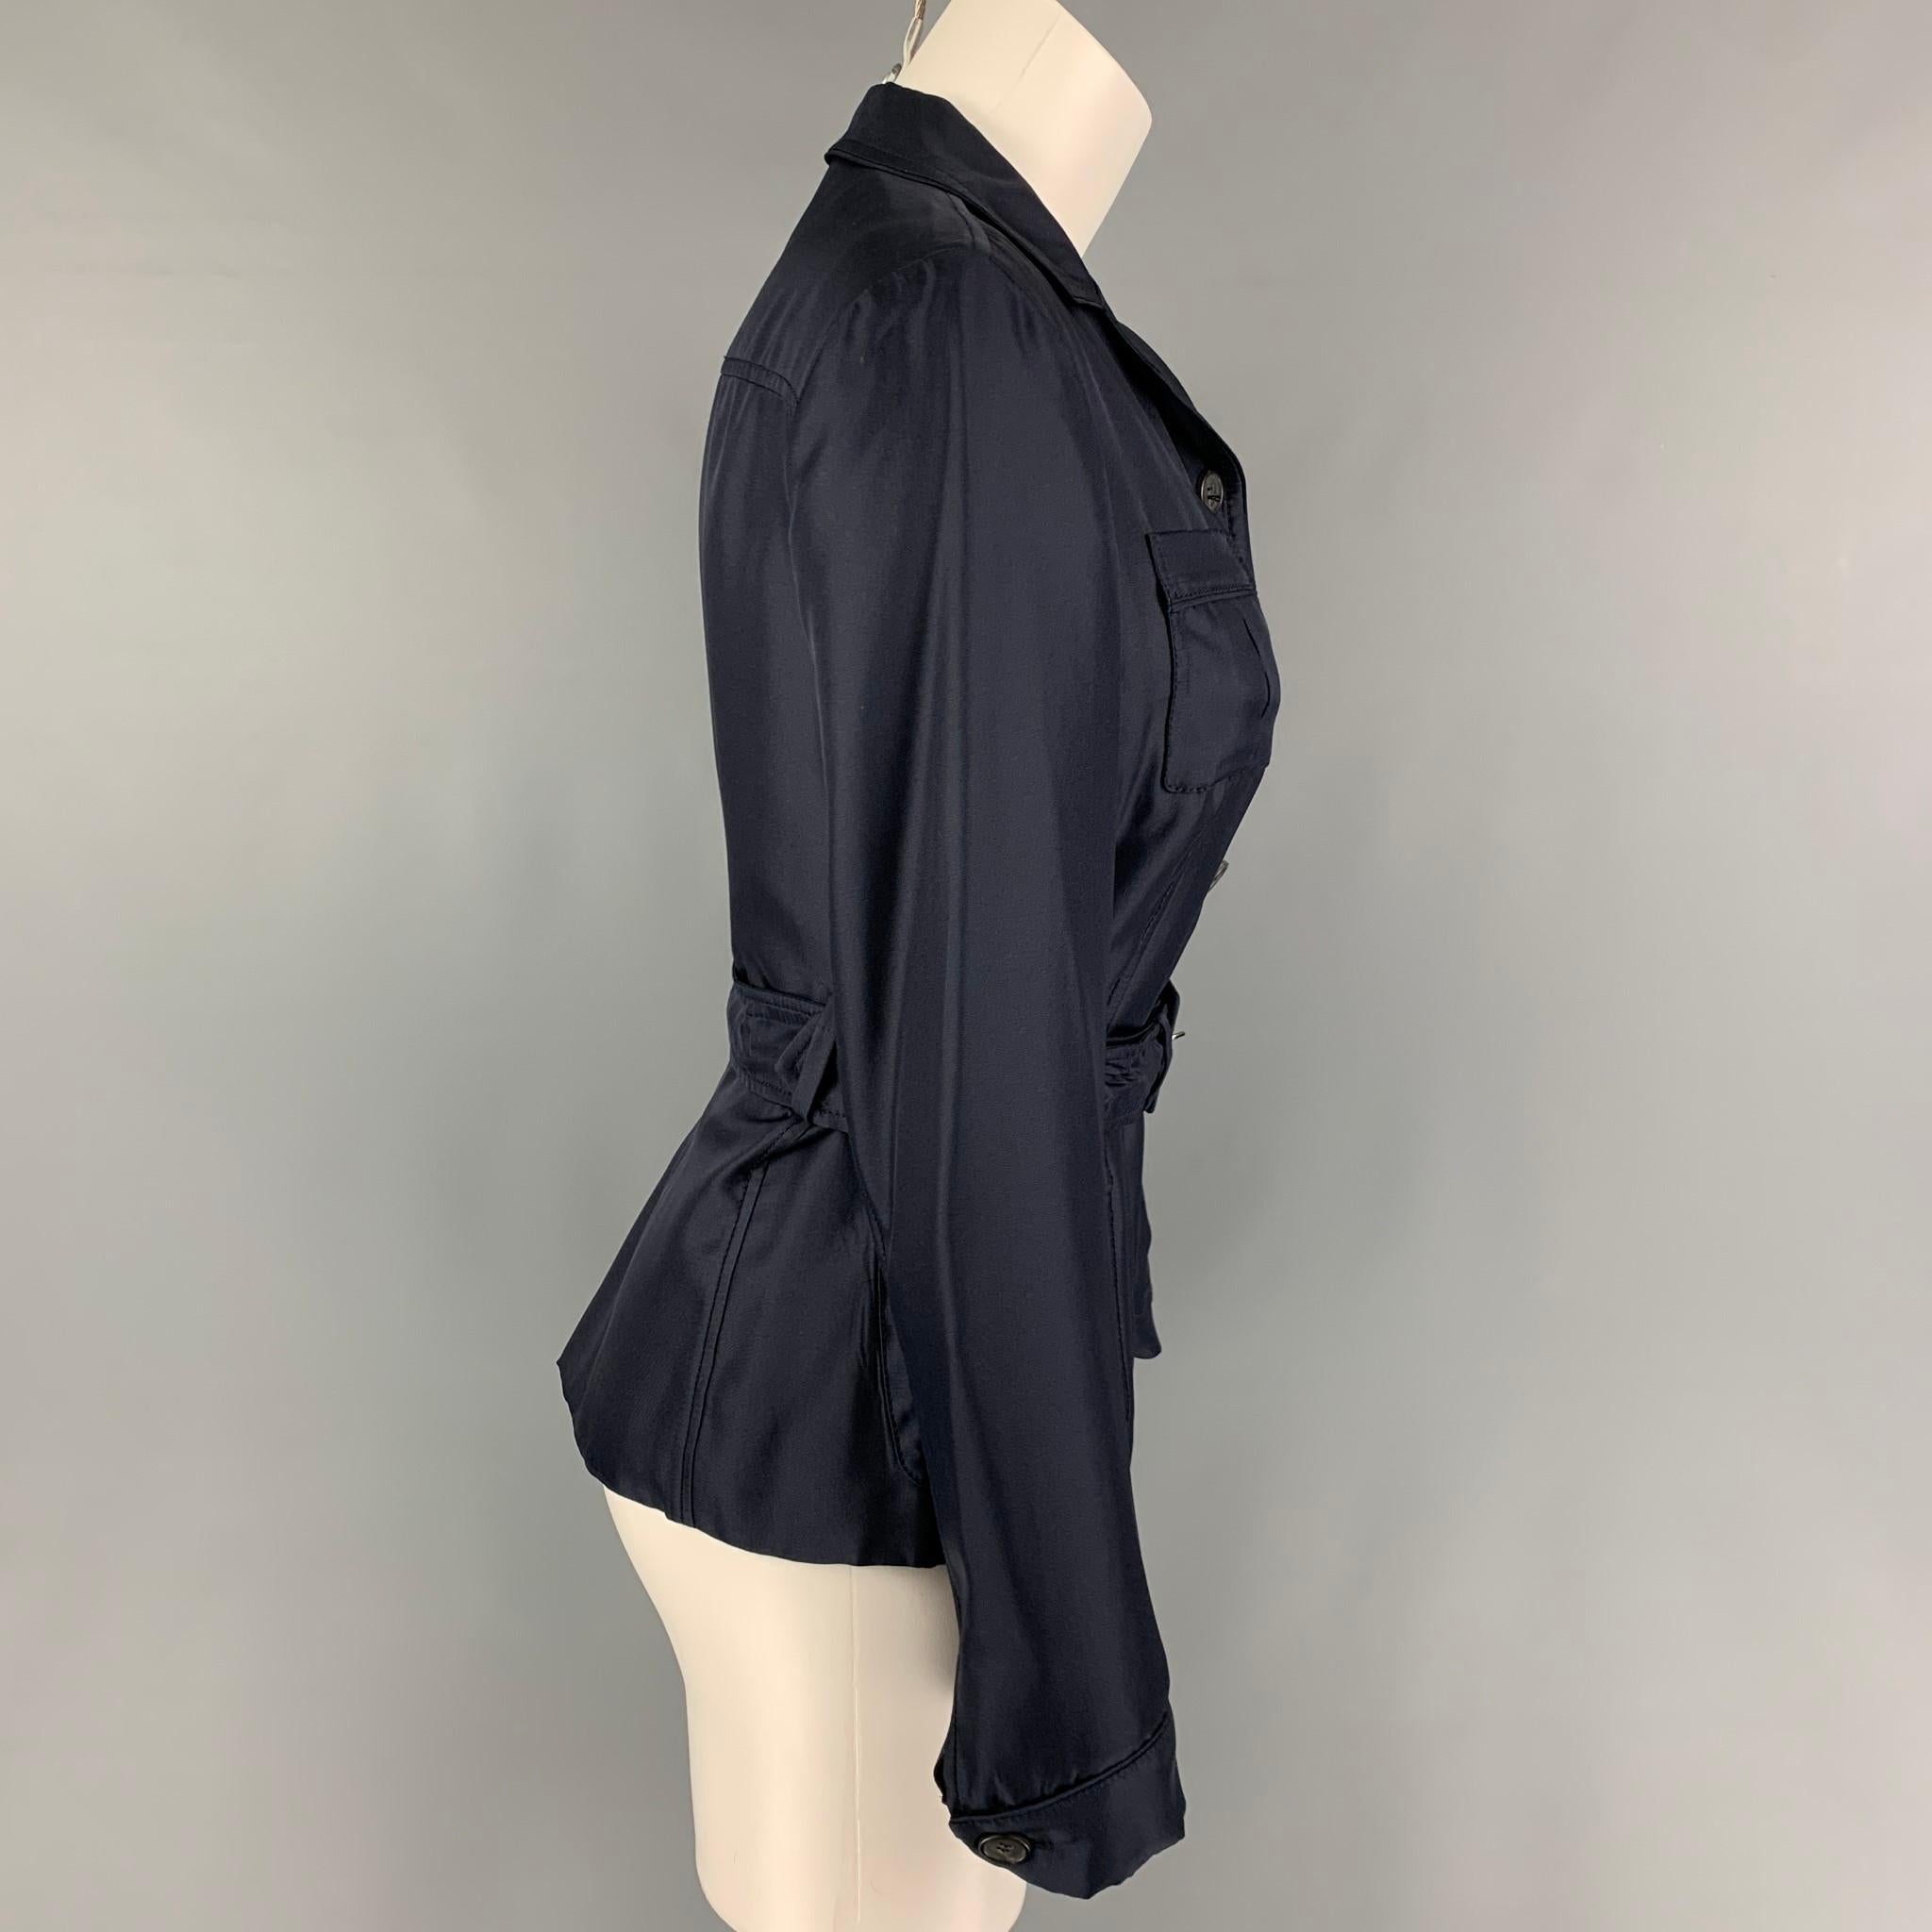 PRADA jacket comes in a navy silk featuring a belted detail, front pockets, notch lapel, and a buttoned closure. Made in Italy. 

Very Good Pre-Owned Condition.
Marked: 40

Measurements:

Shoulder: 16 in.
Bust: 34 in.
Sleeve: 24.5 in.
Length: 23 in. 